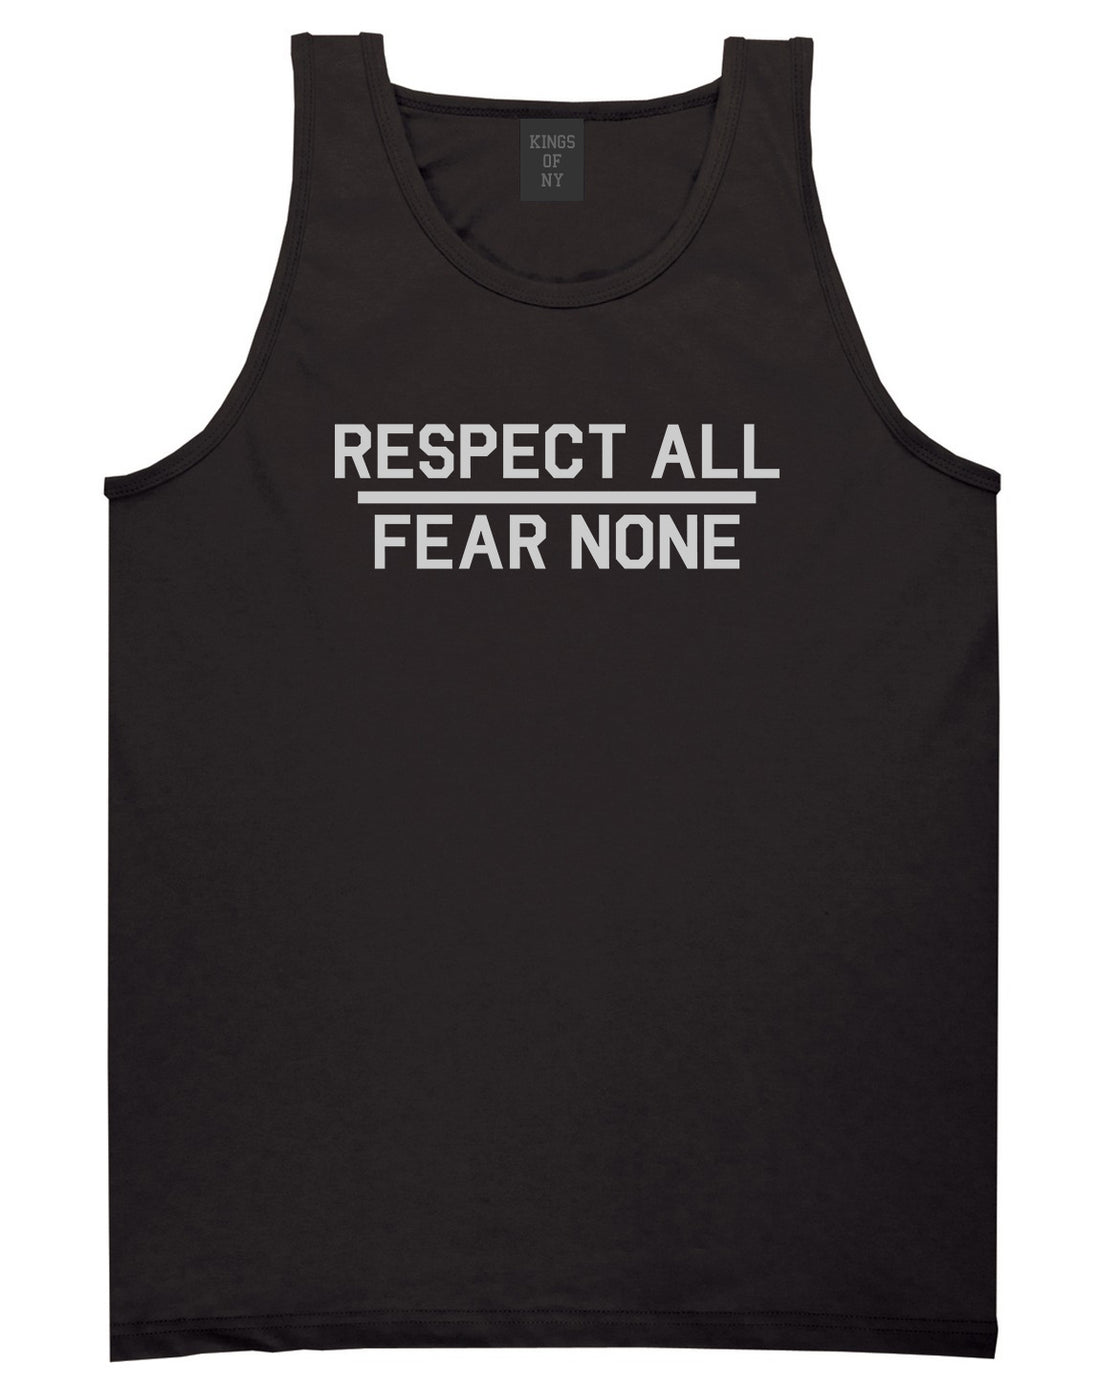 Respect All Fear None Mens Tank Top Shirt Black by Kings Of NY